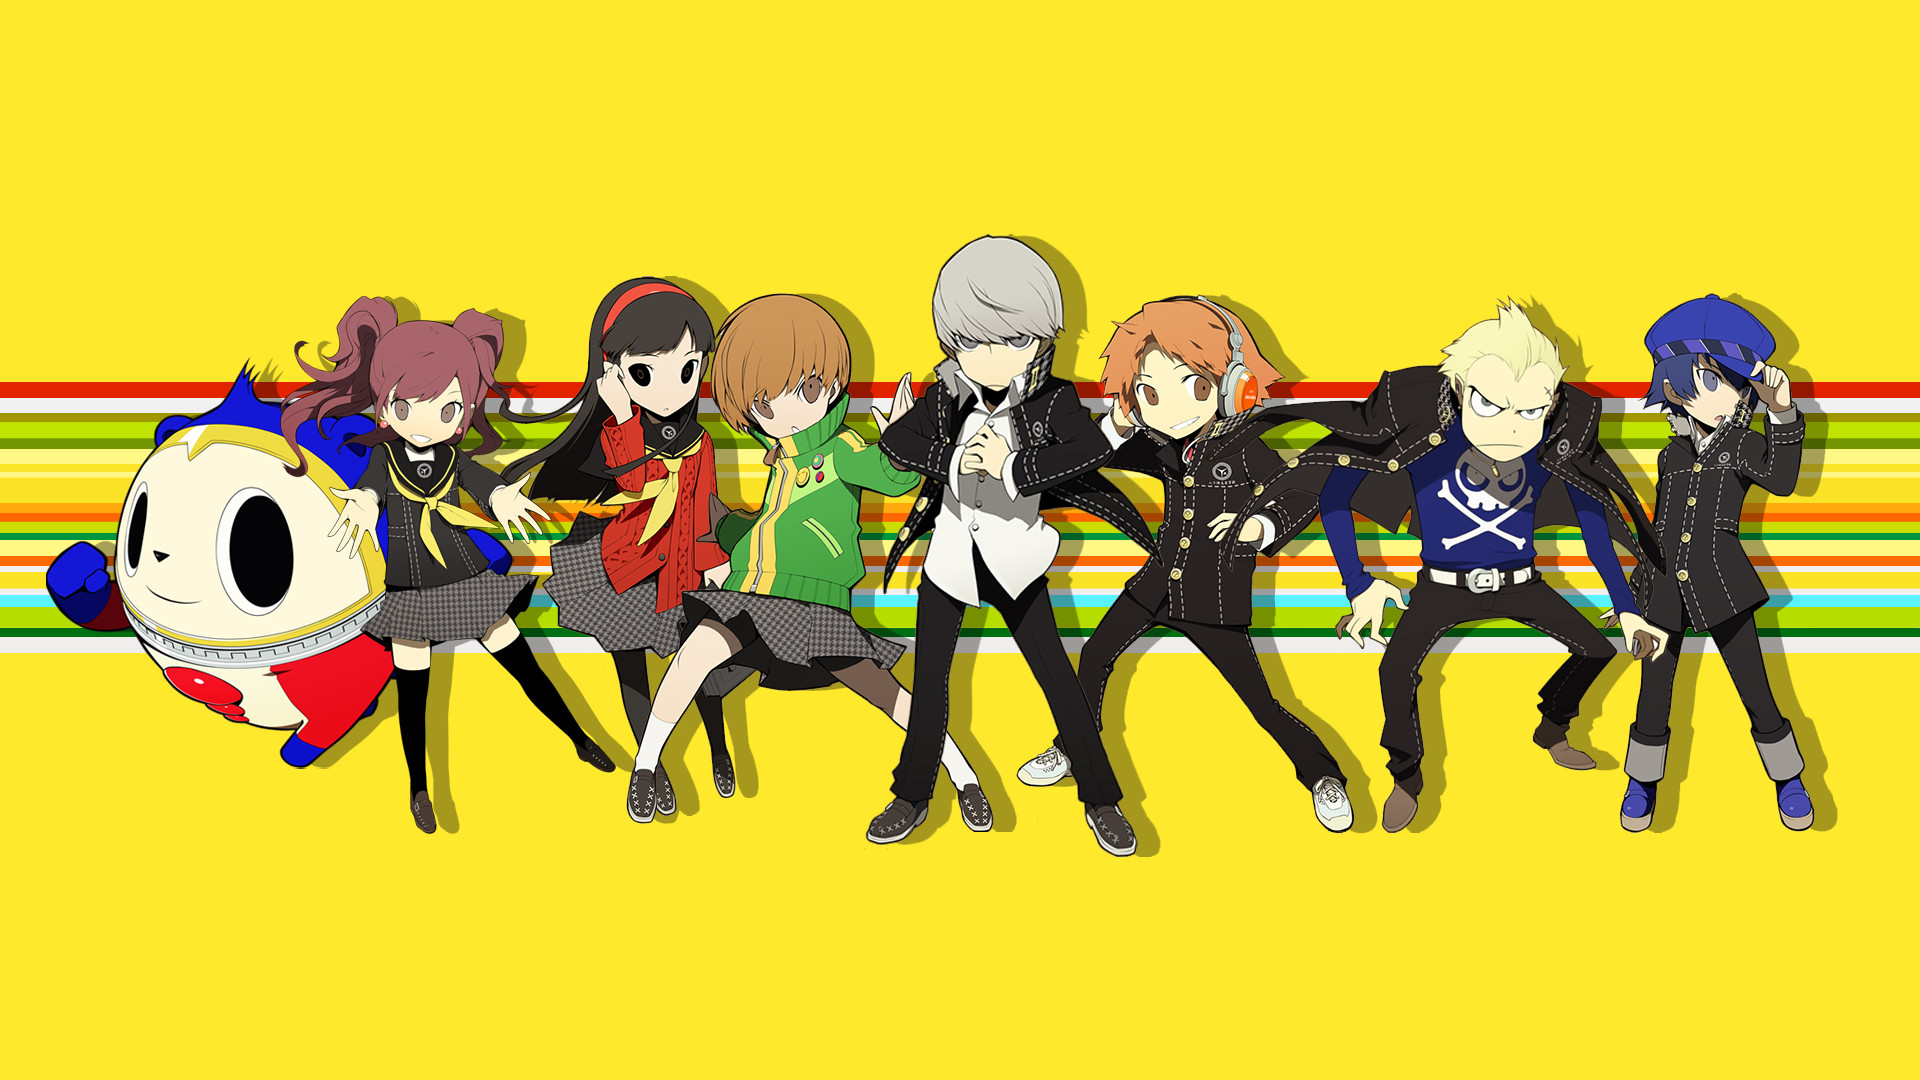 1920x1080 A Persona 4 wallpaper I made using the PQ chibis ...